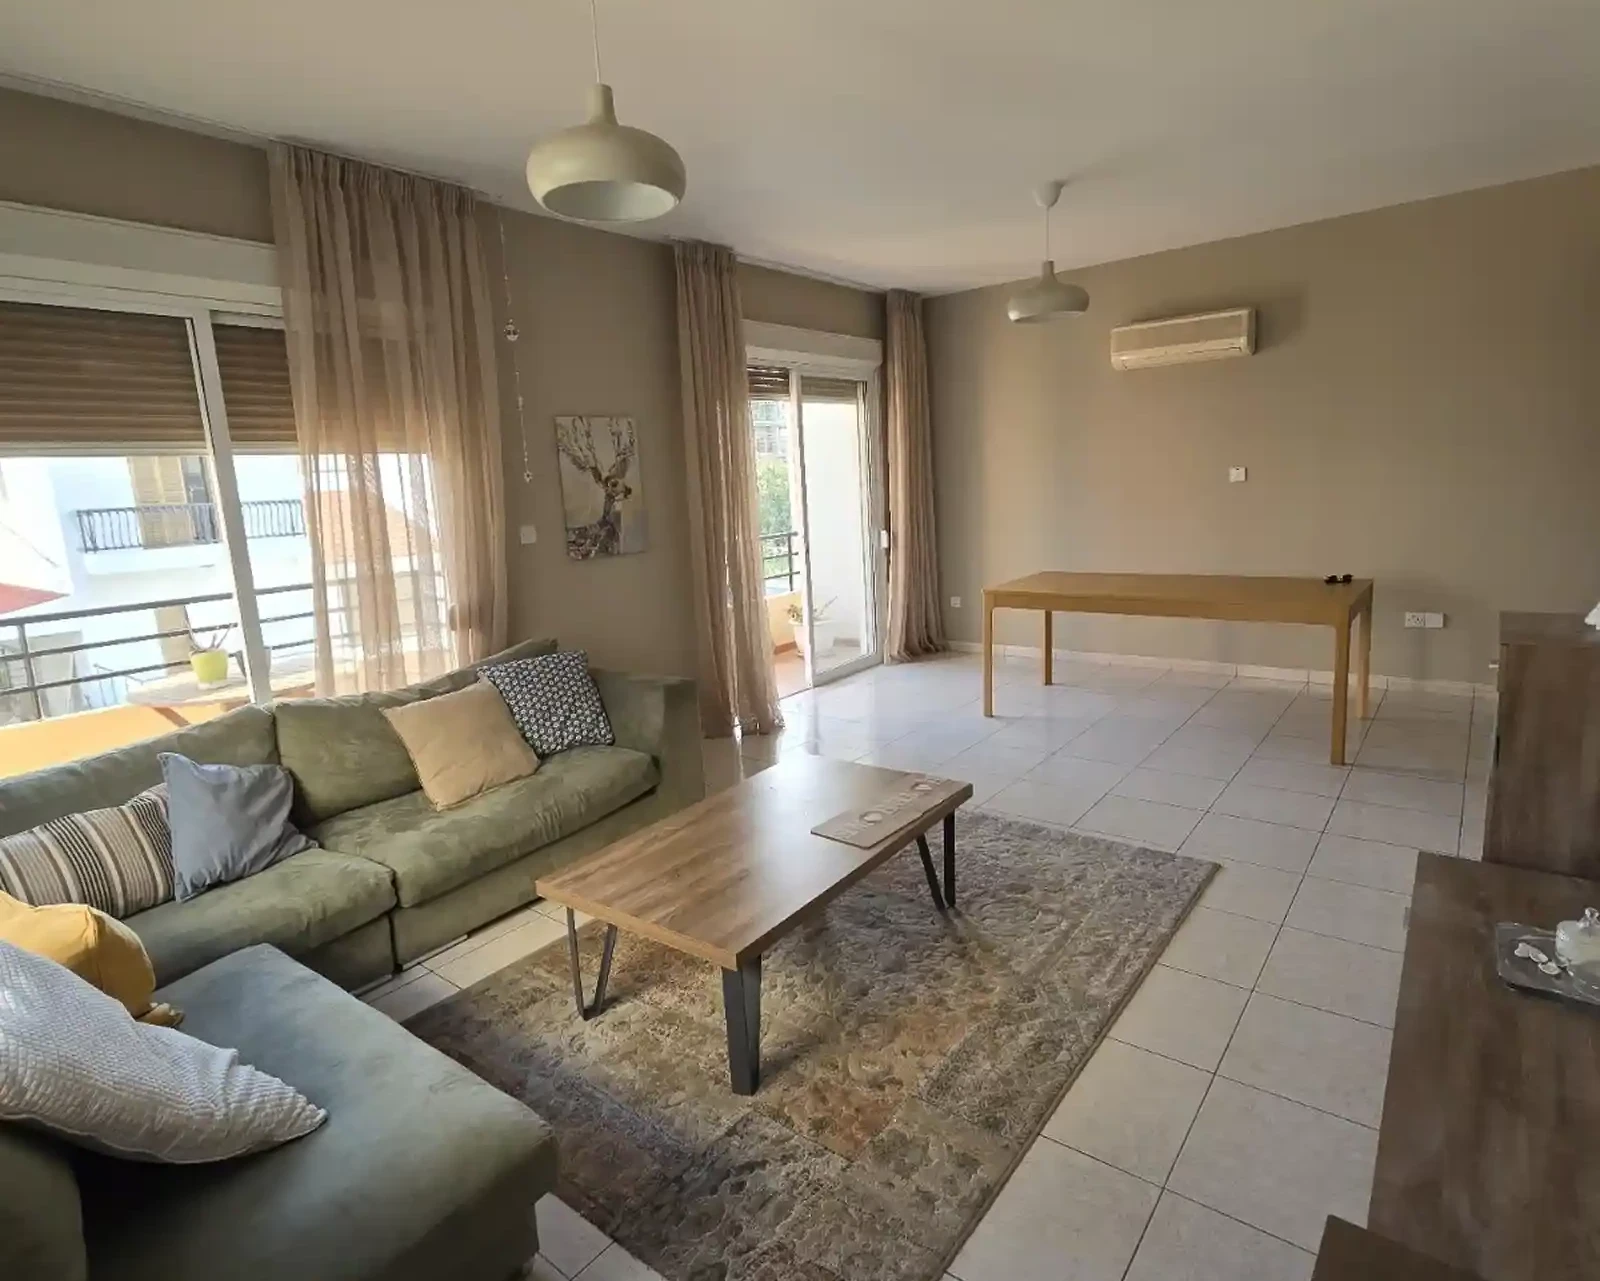 3-bedroom apartment to rent €1.500, image 1